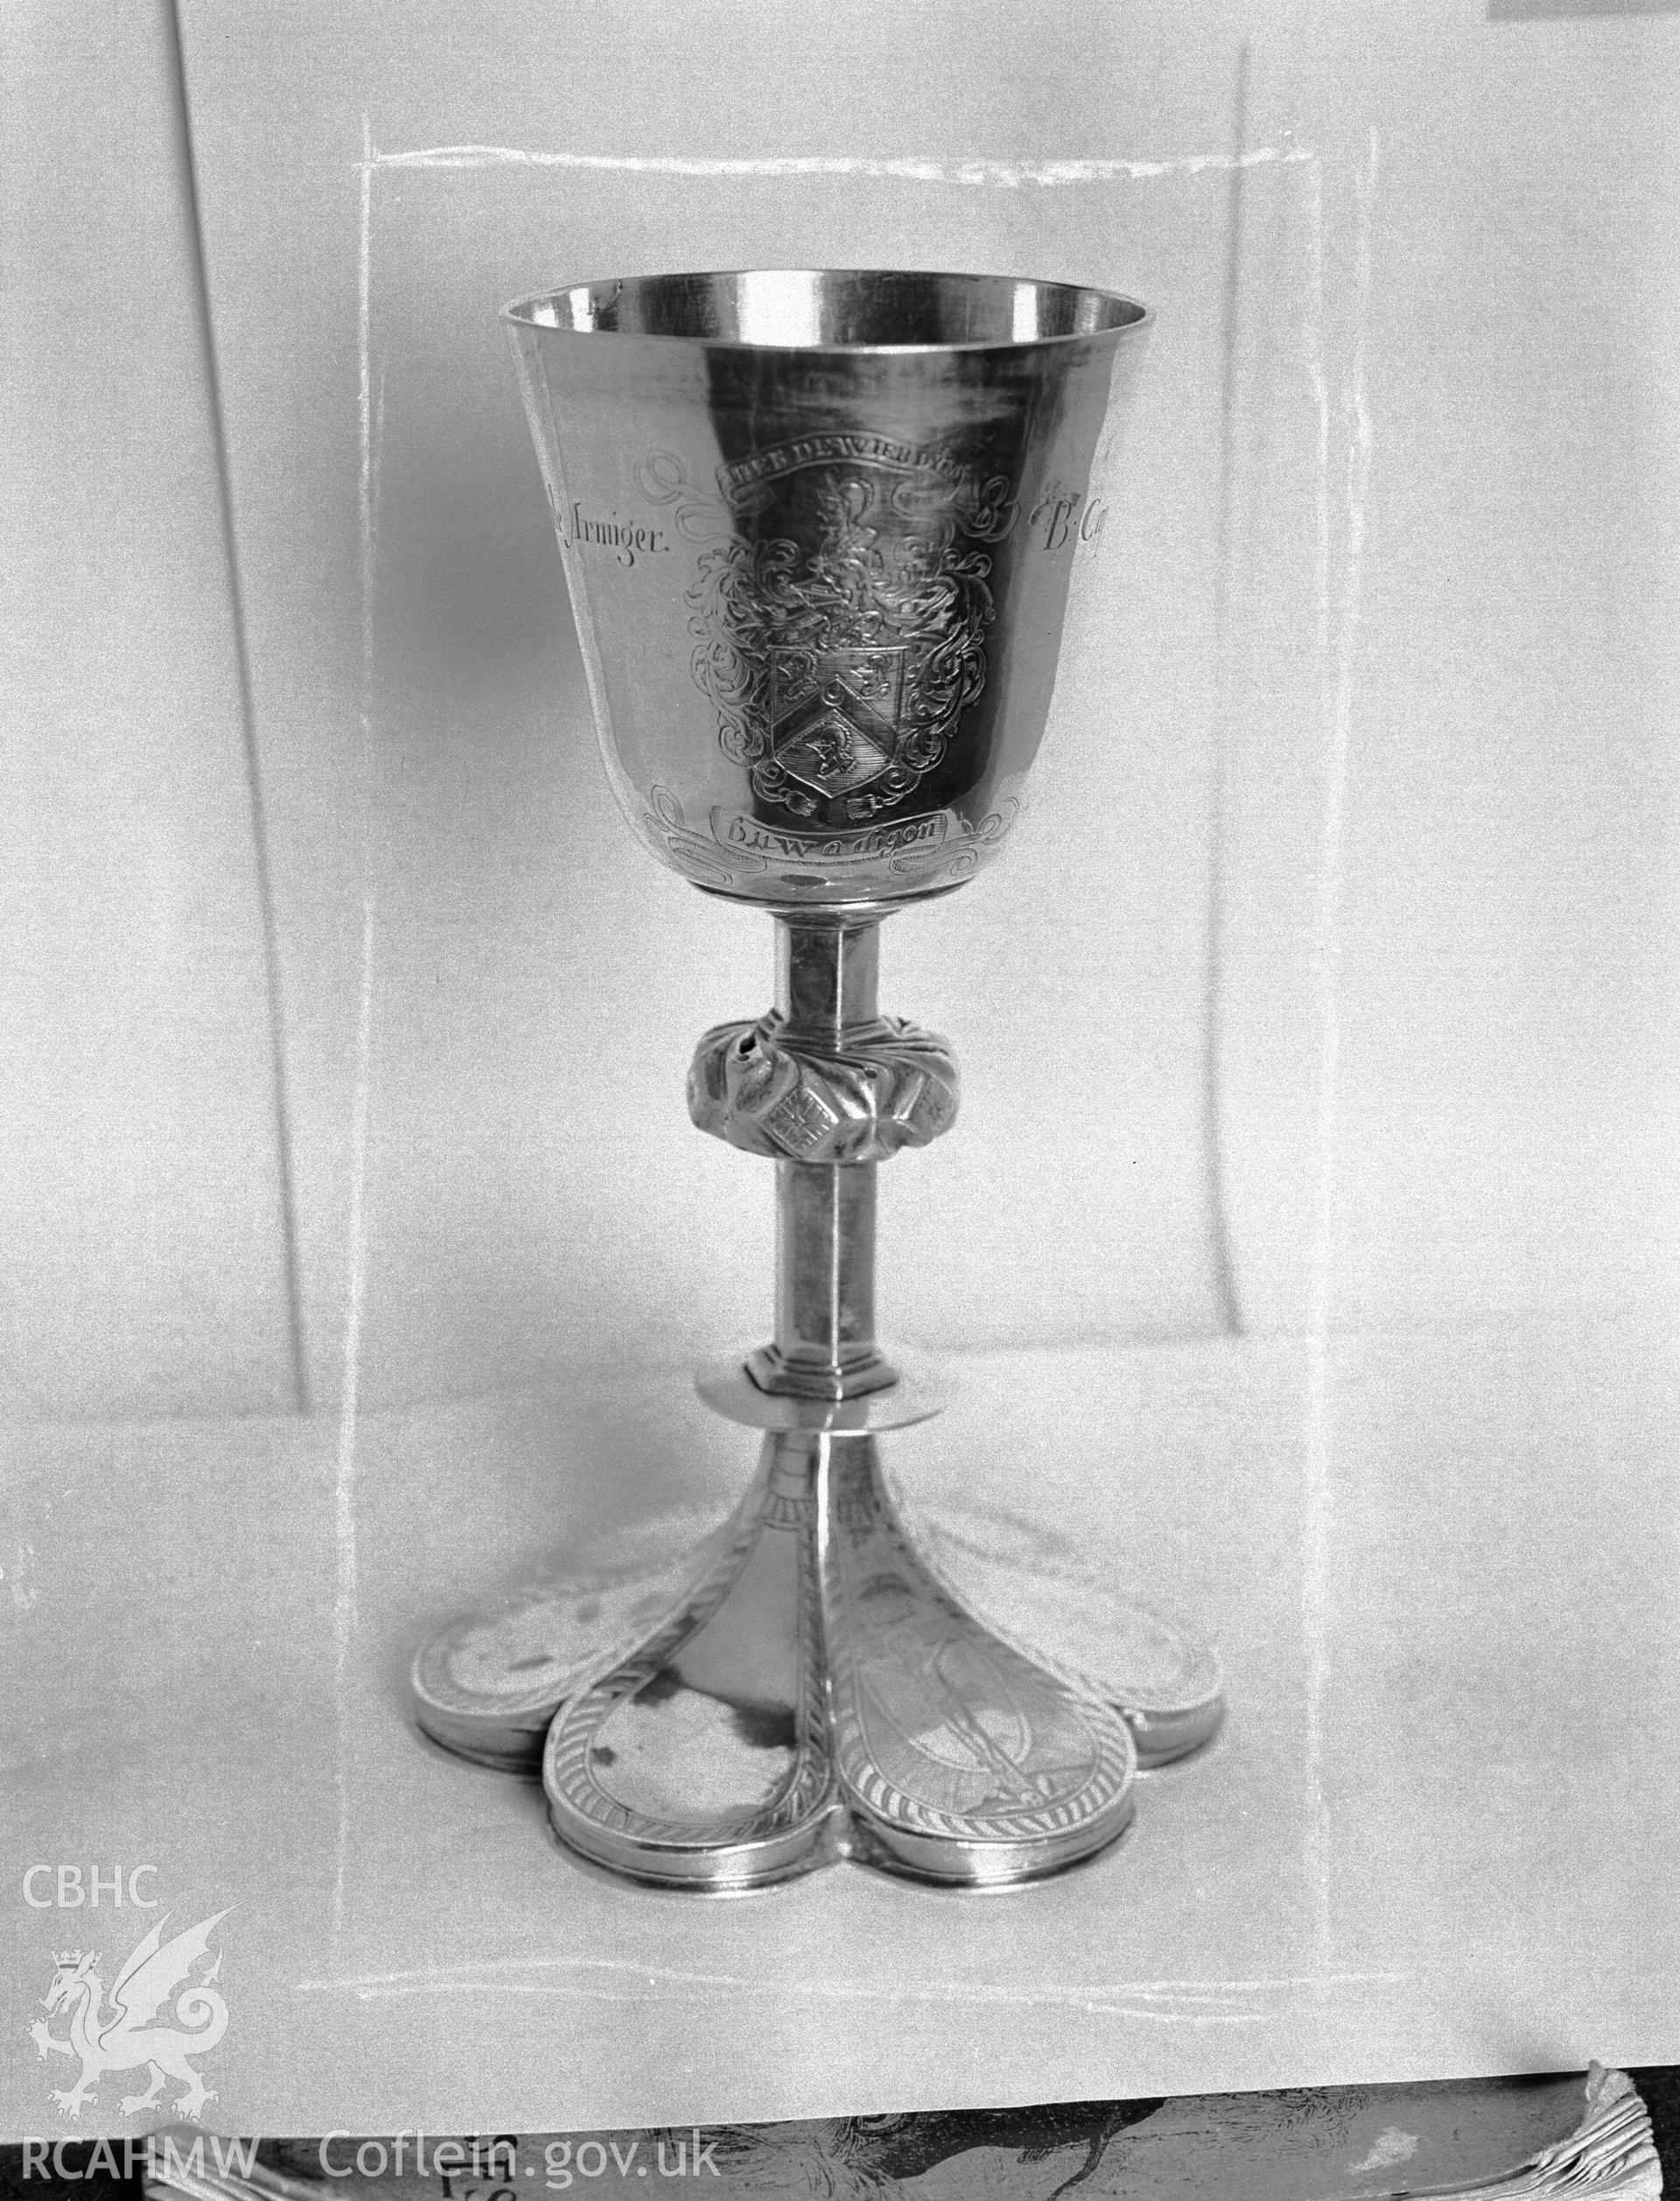 View of chalice